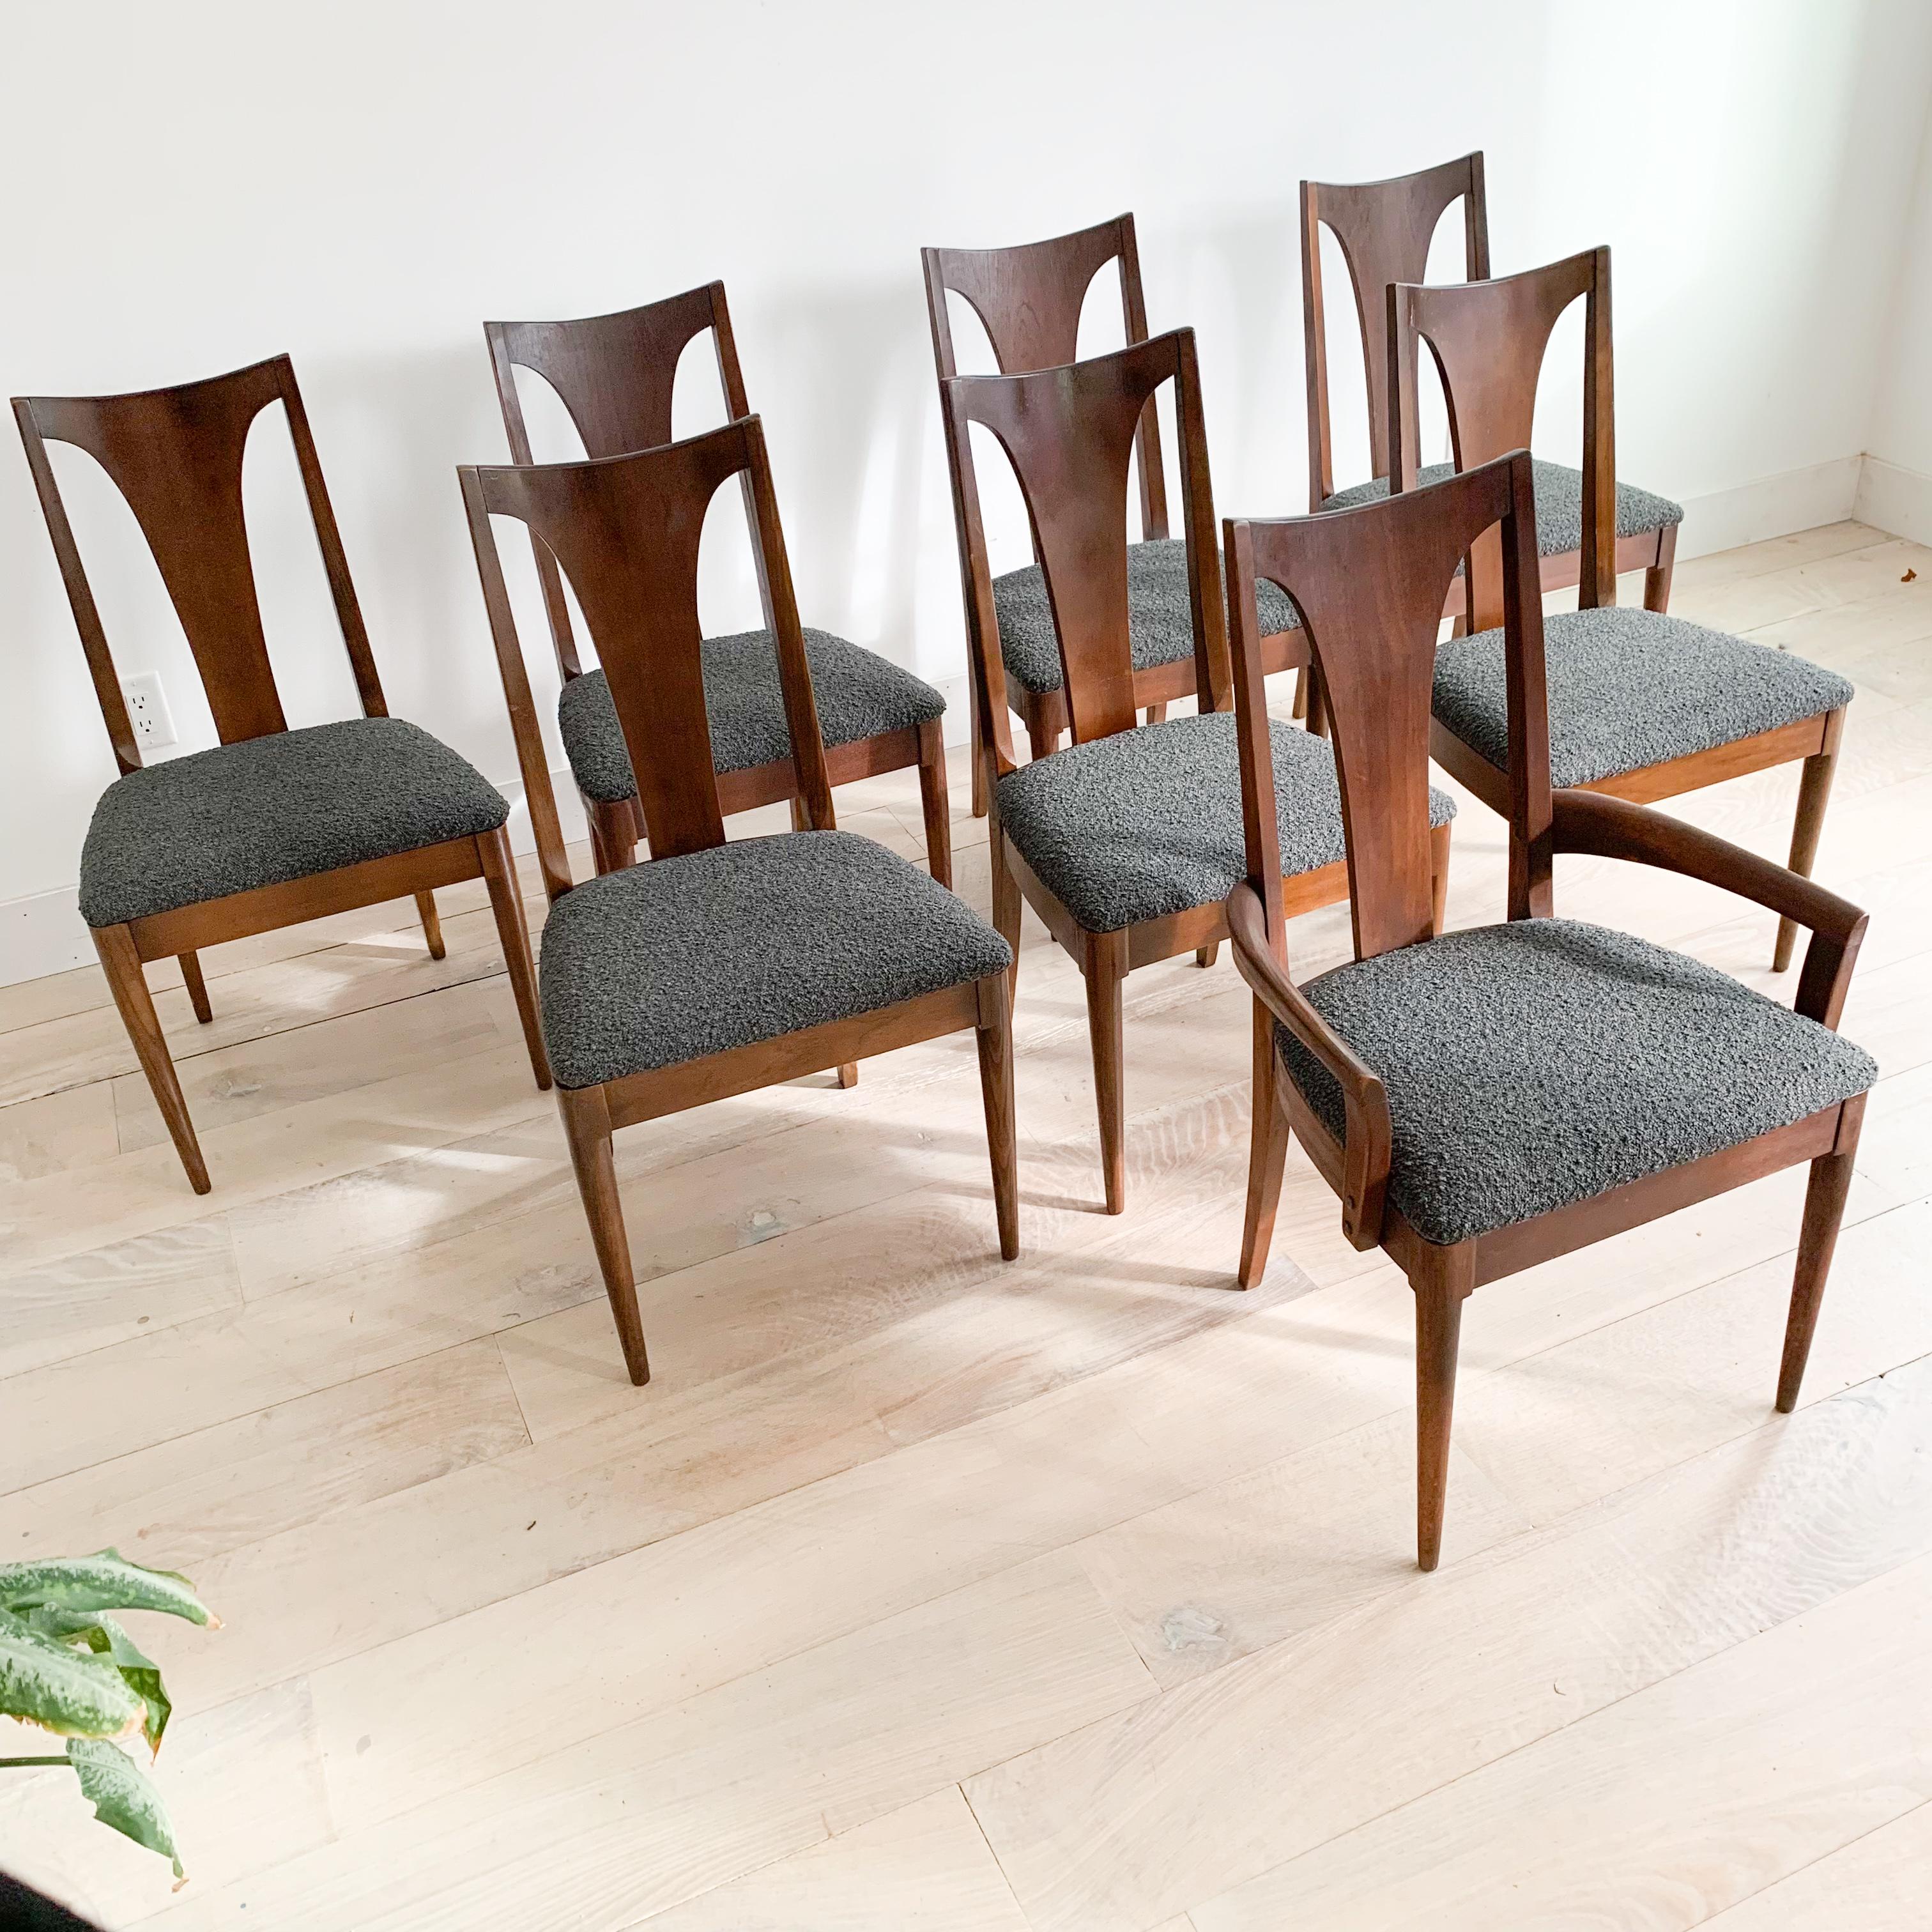 Set of 8 Broyhill Brasilia Dining Chairs - New Upholstery 1